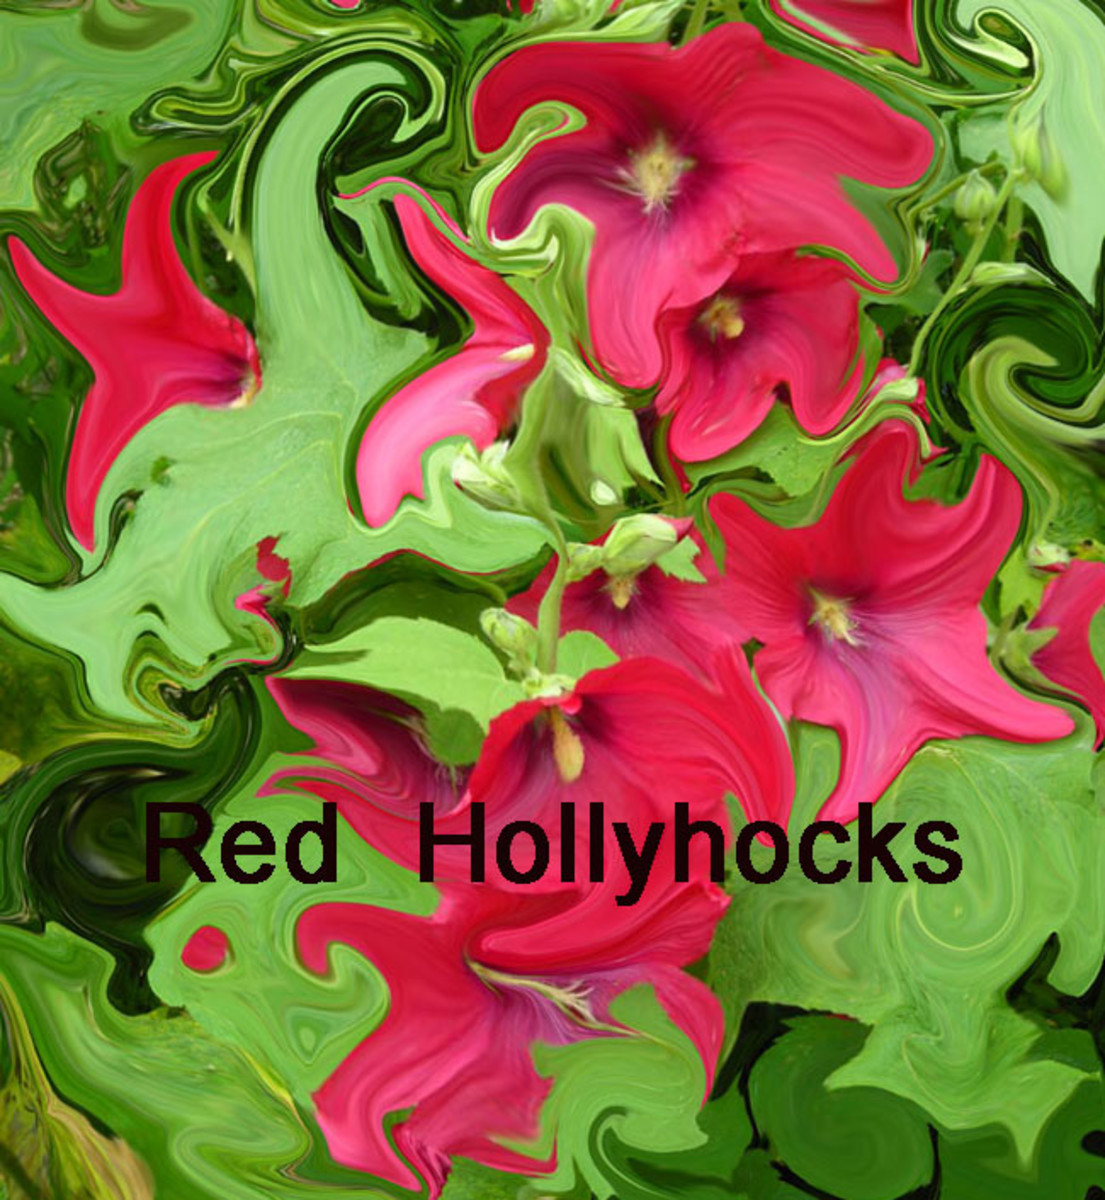 Photos of Red Hollyhocks and Simple Adobe Photoshop Tips